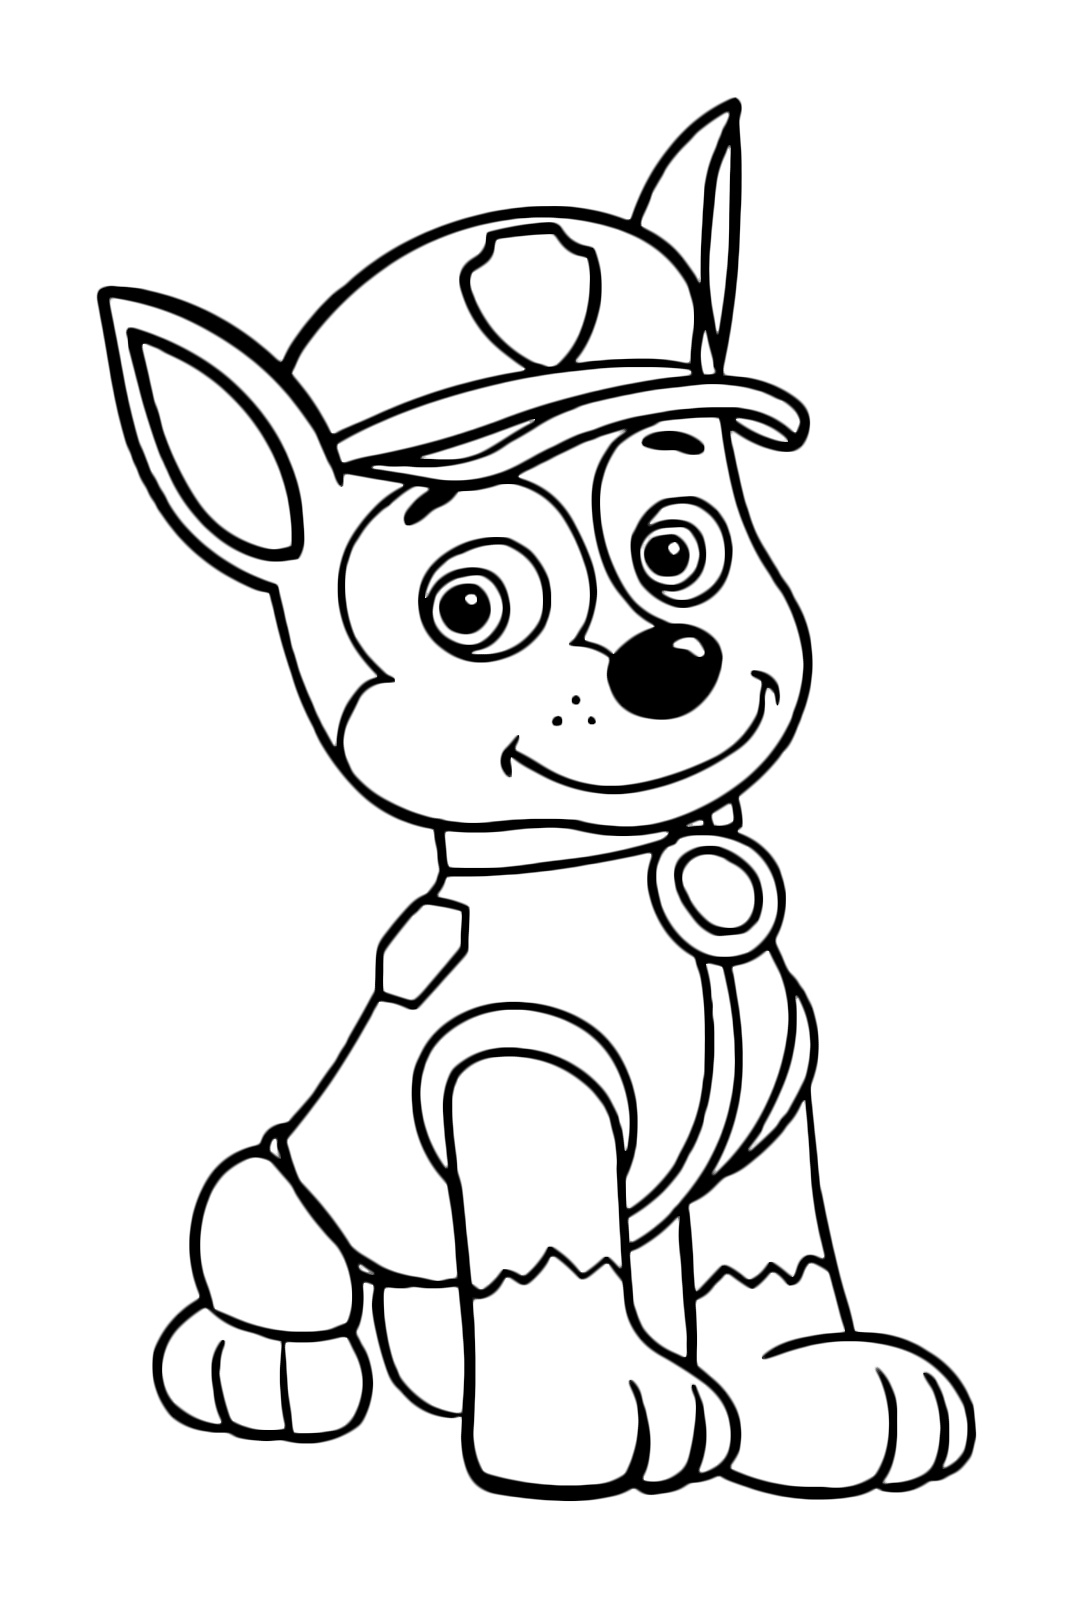 Paw Patrol Colouring - Paw Patrol coloring pages | Print and Color.com